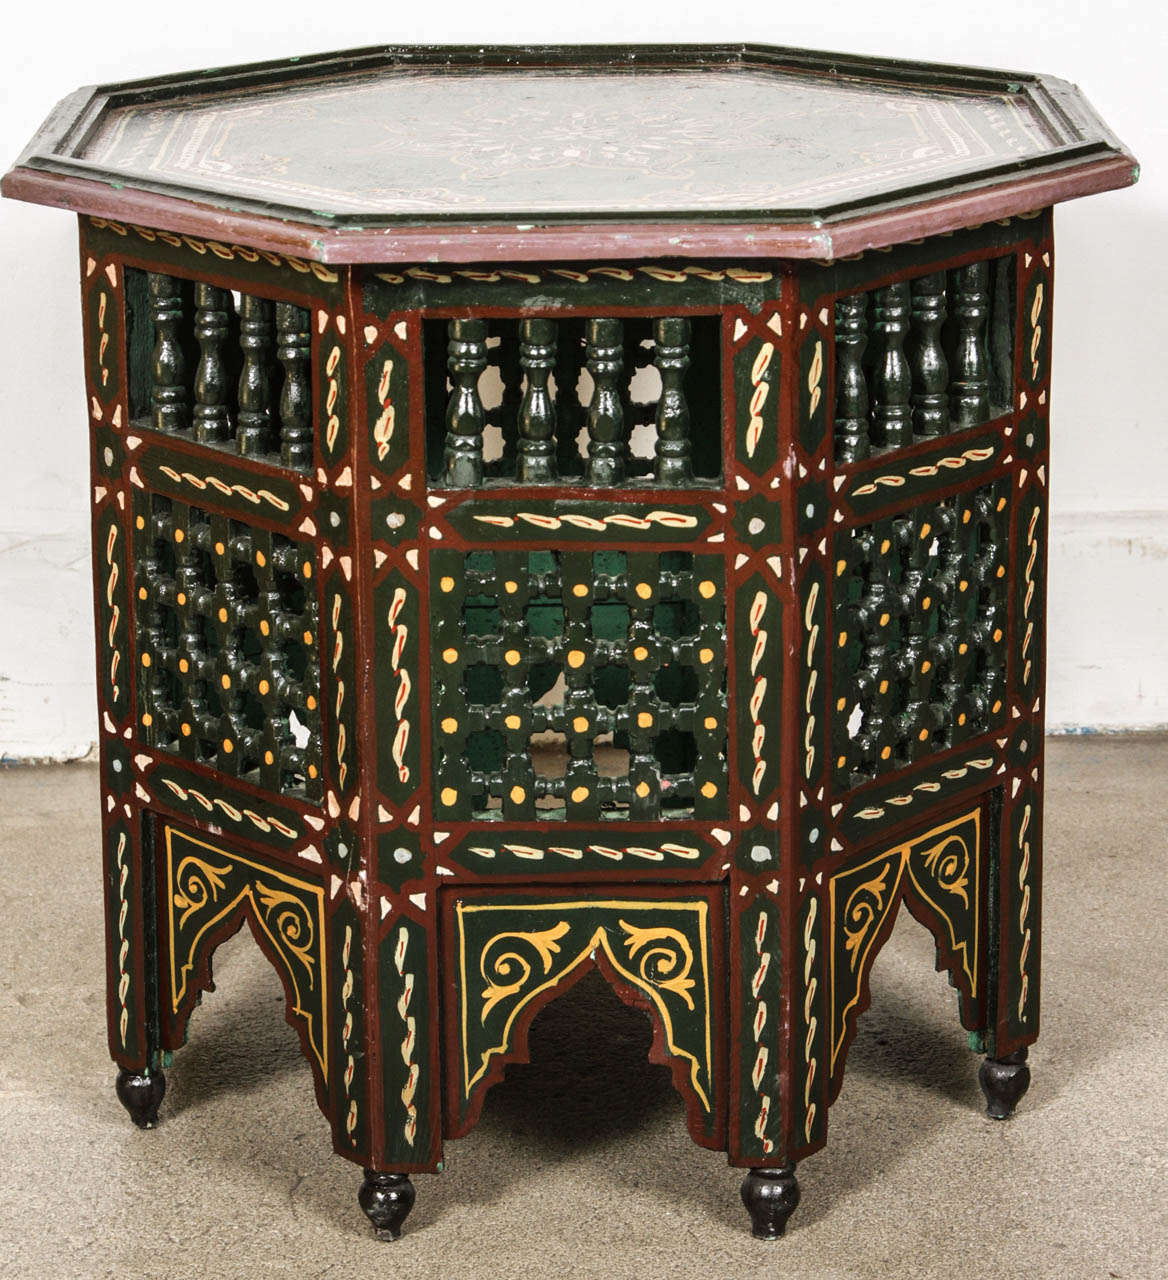 Pair of Moroccan colorful hand-painted dark green side table with Moorish design and open fret mousharabie work on sides.
Dark green background with multicolored floral top and geometric designs.
Very fine wood artwork on an octagonal shape with